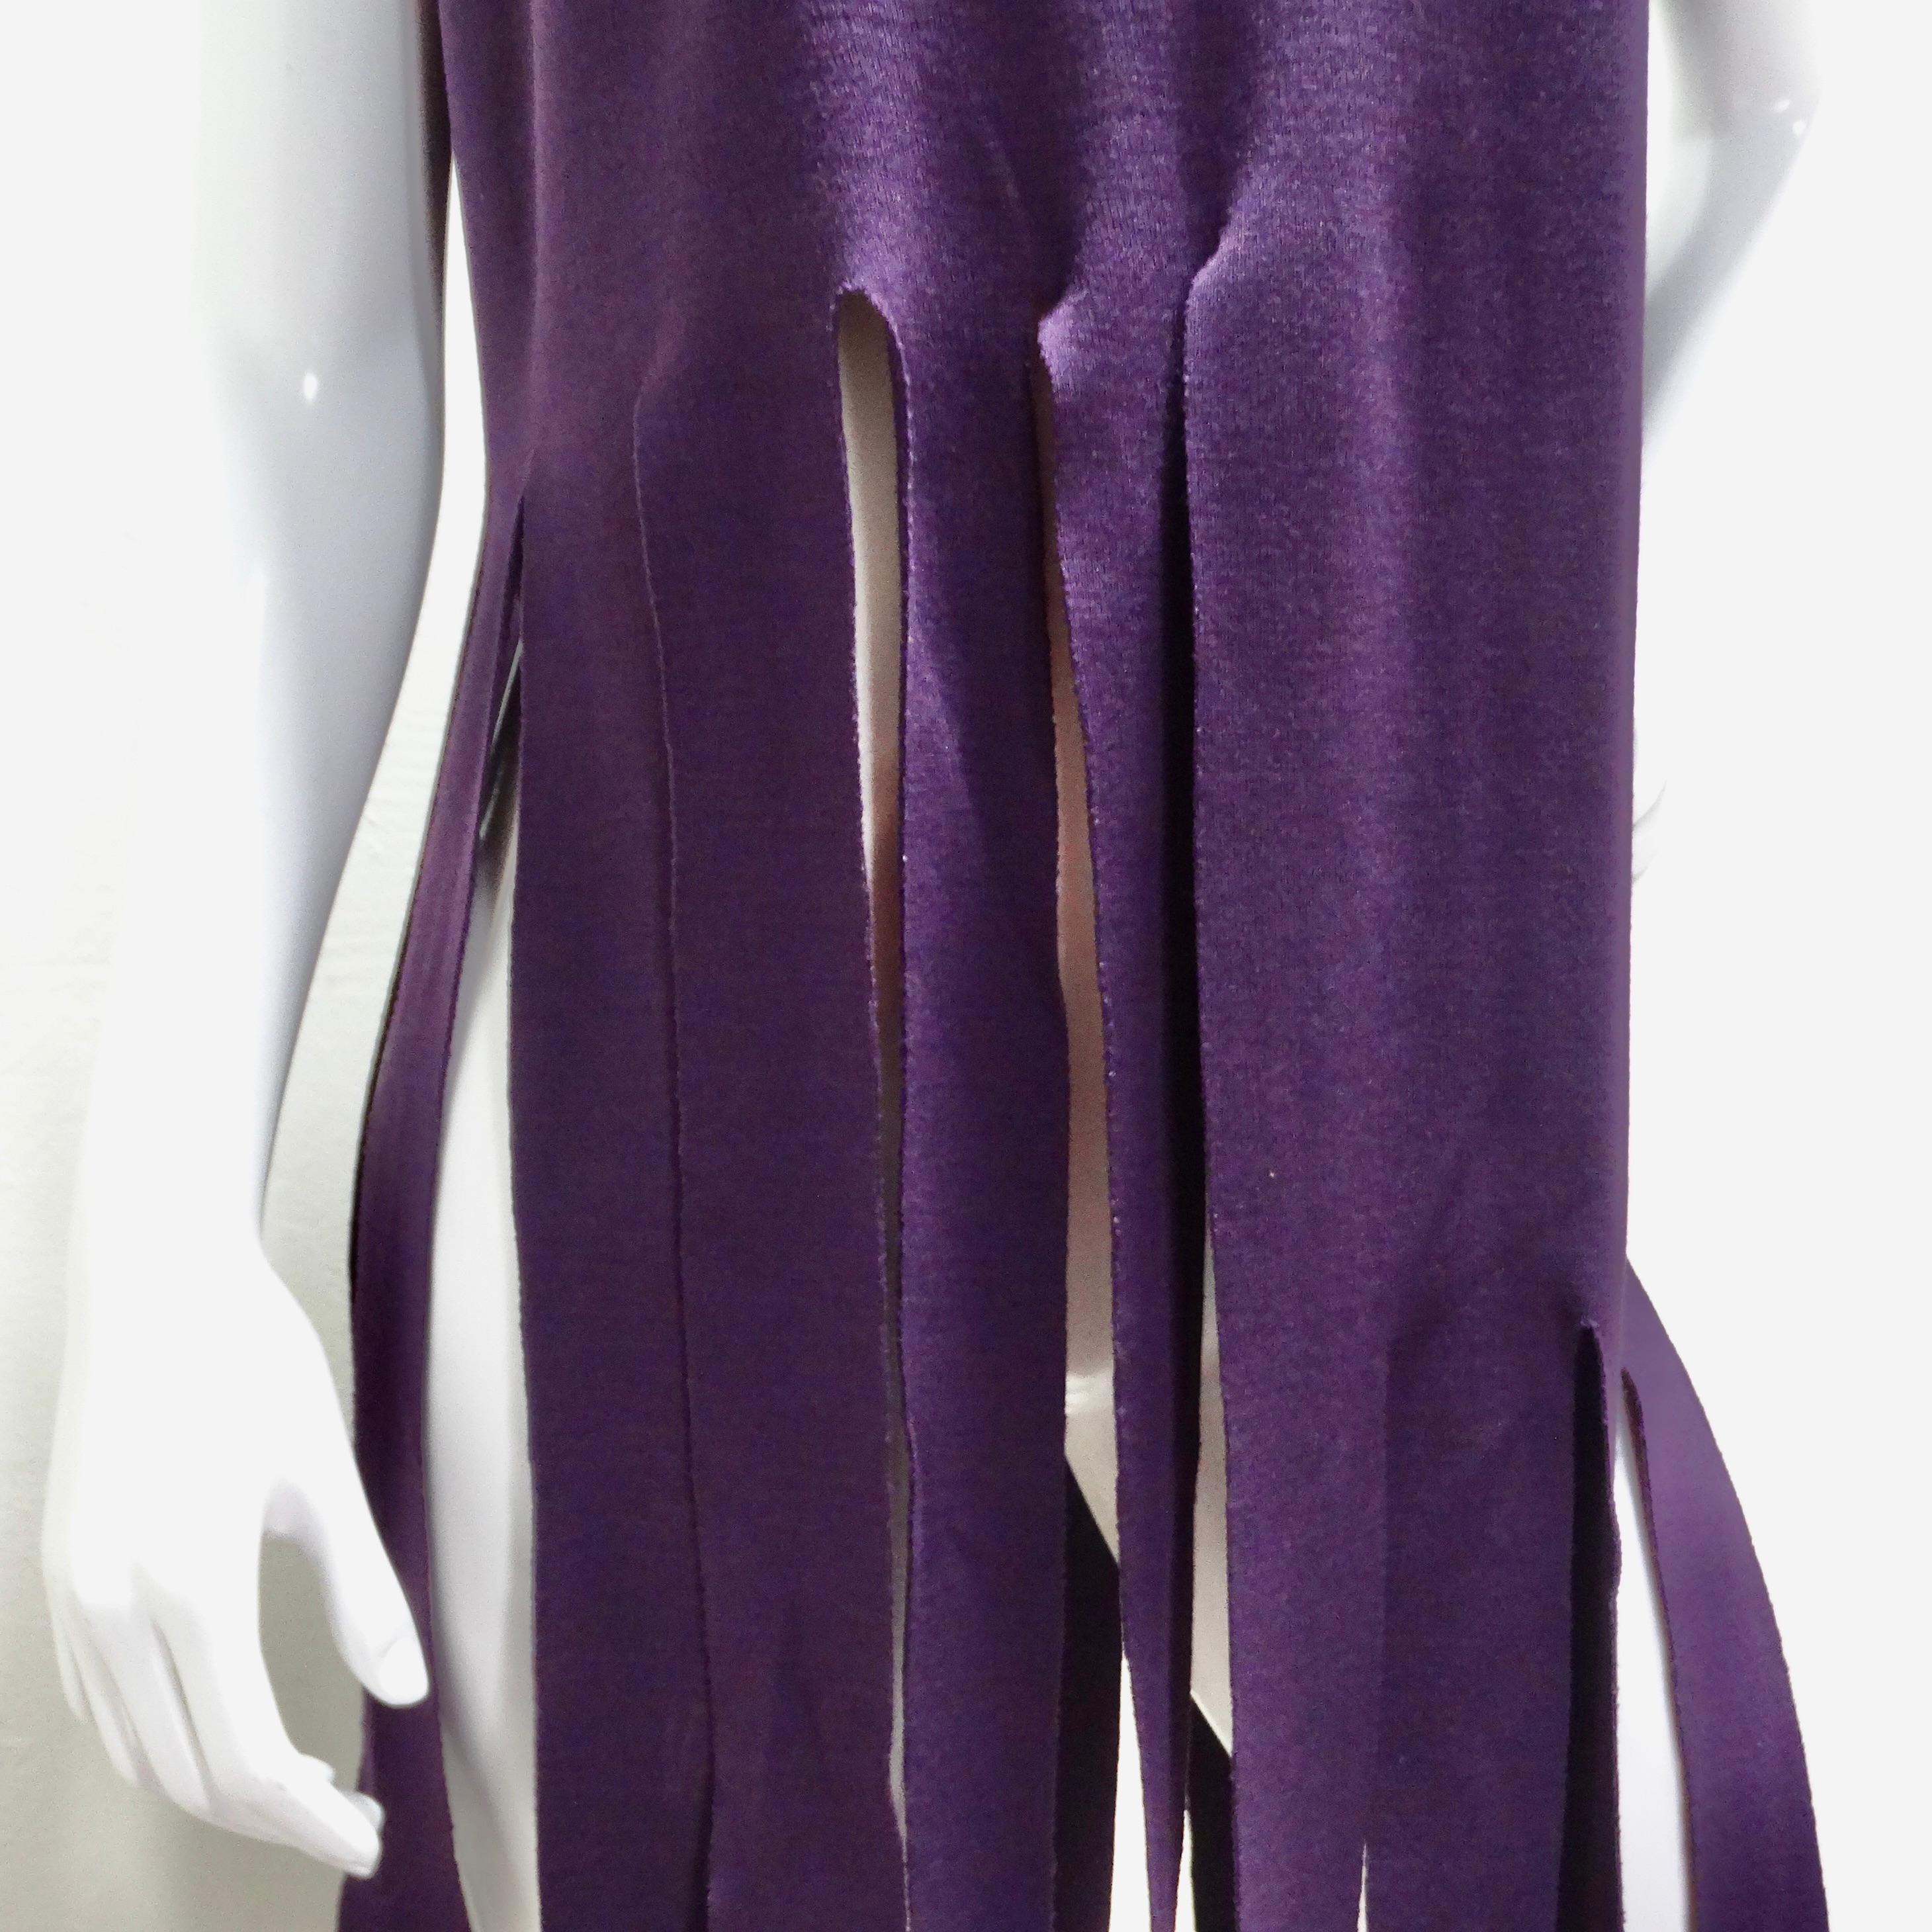 Introducing the Pierre Cardin Reissued Purple Fringe Top, a captivating and unique piece that exudes modern sophistication and avant-garde style. Crafted in a striking dark purple hue, this statement top is designed to make a bold impression.

The